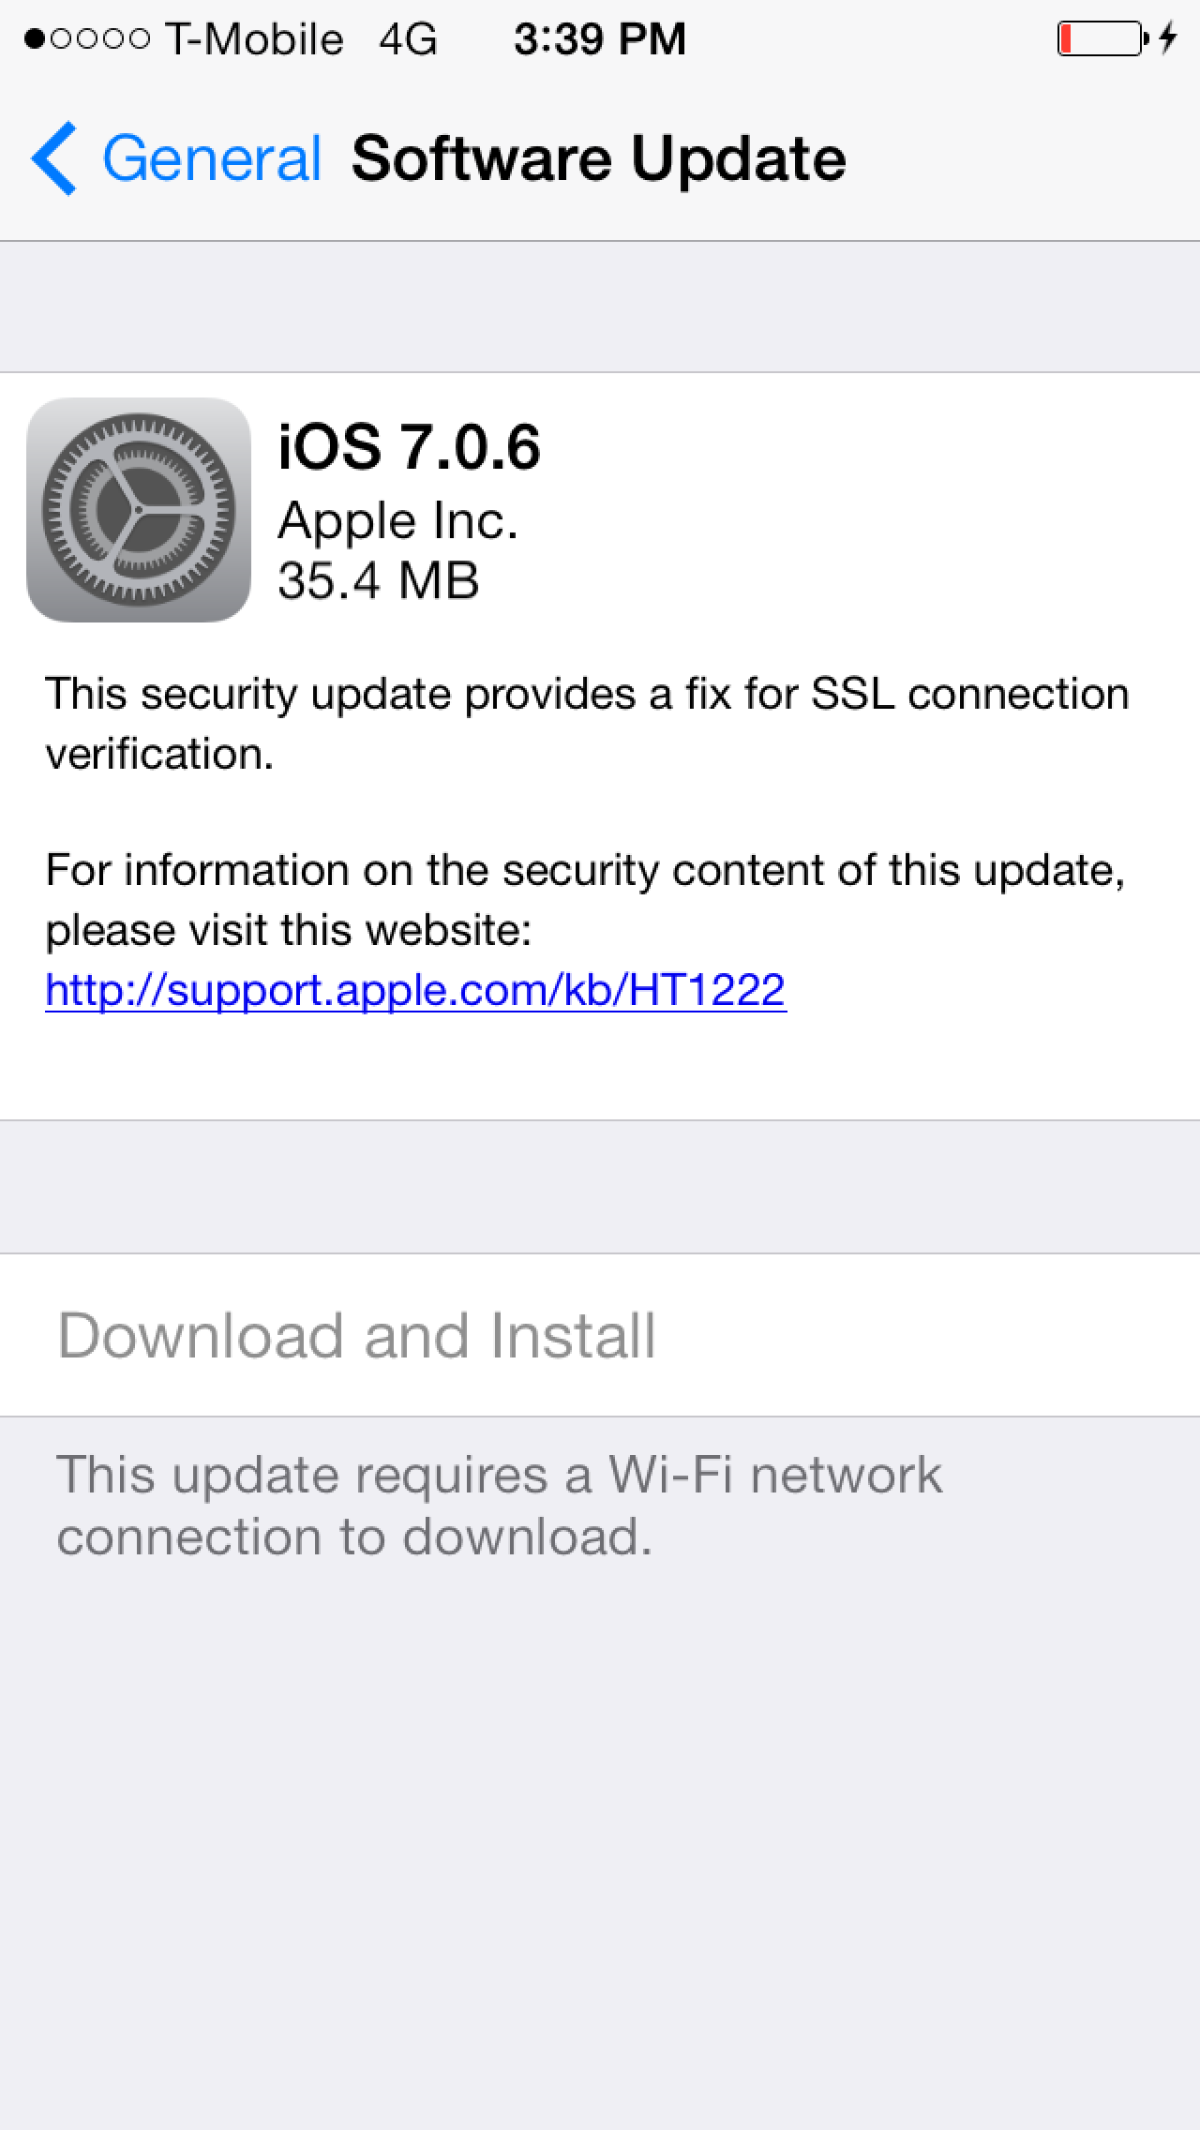 Apple has released an iOS update designed to fix the "Gotofail" bug.